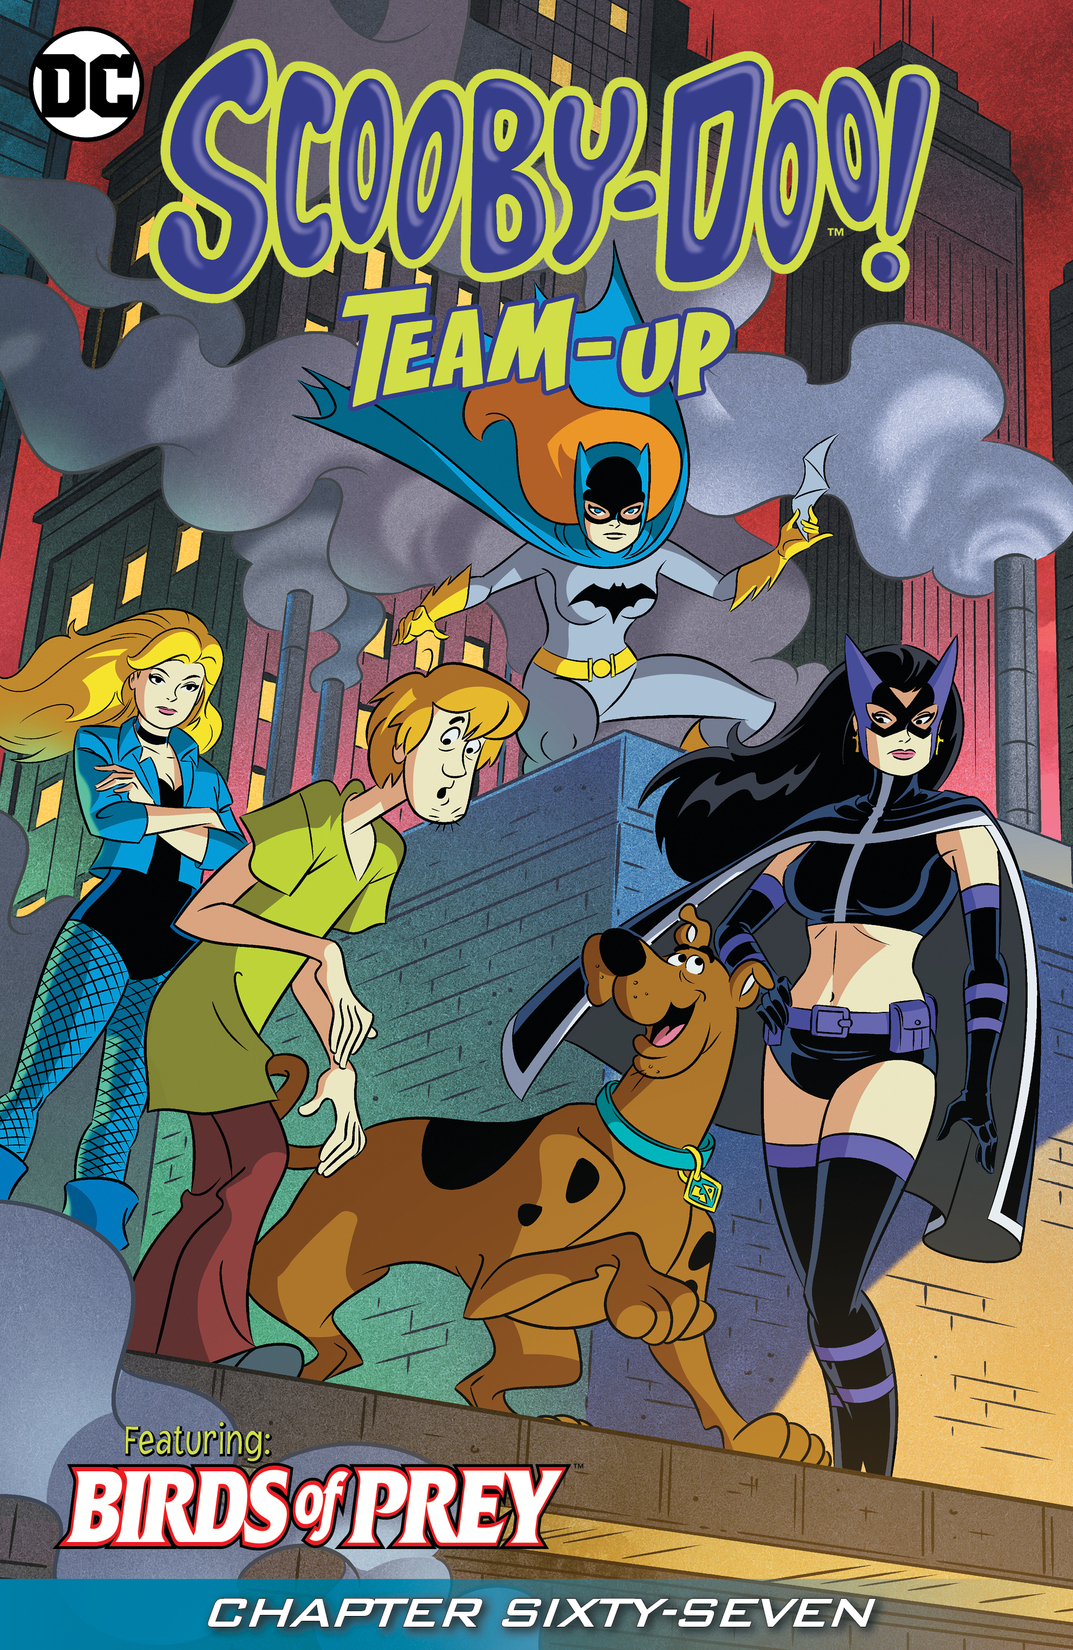 Scooby-Doo Team-Up #67 preview images